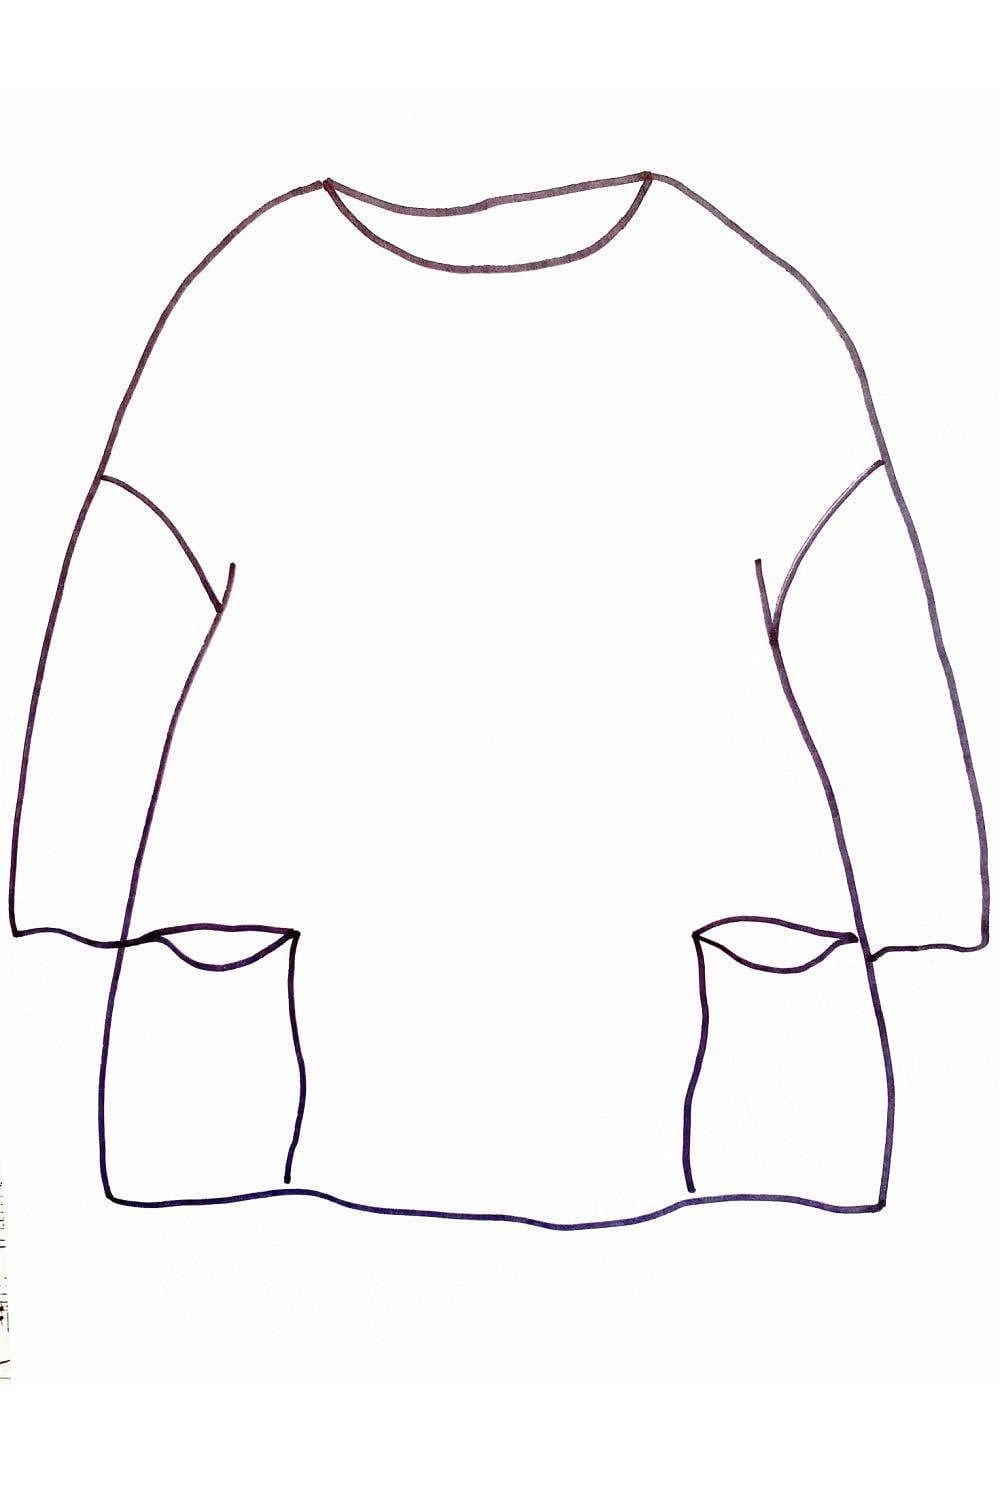 Two Pocket Top Line Drawing